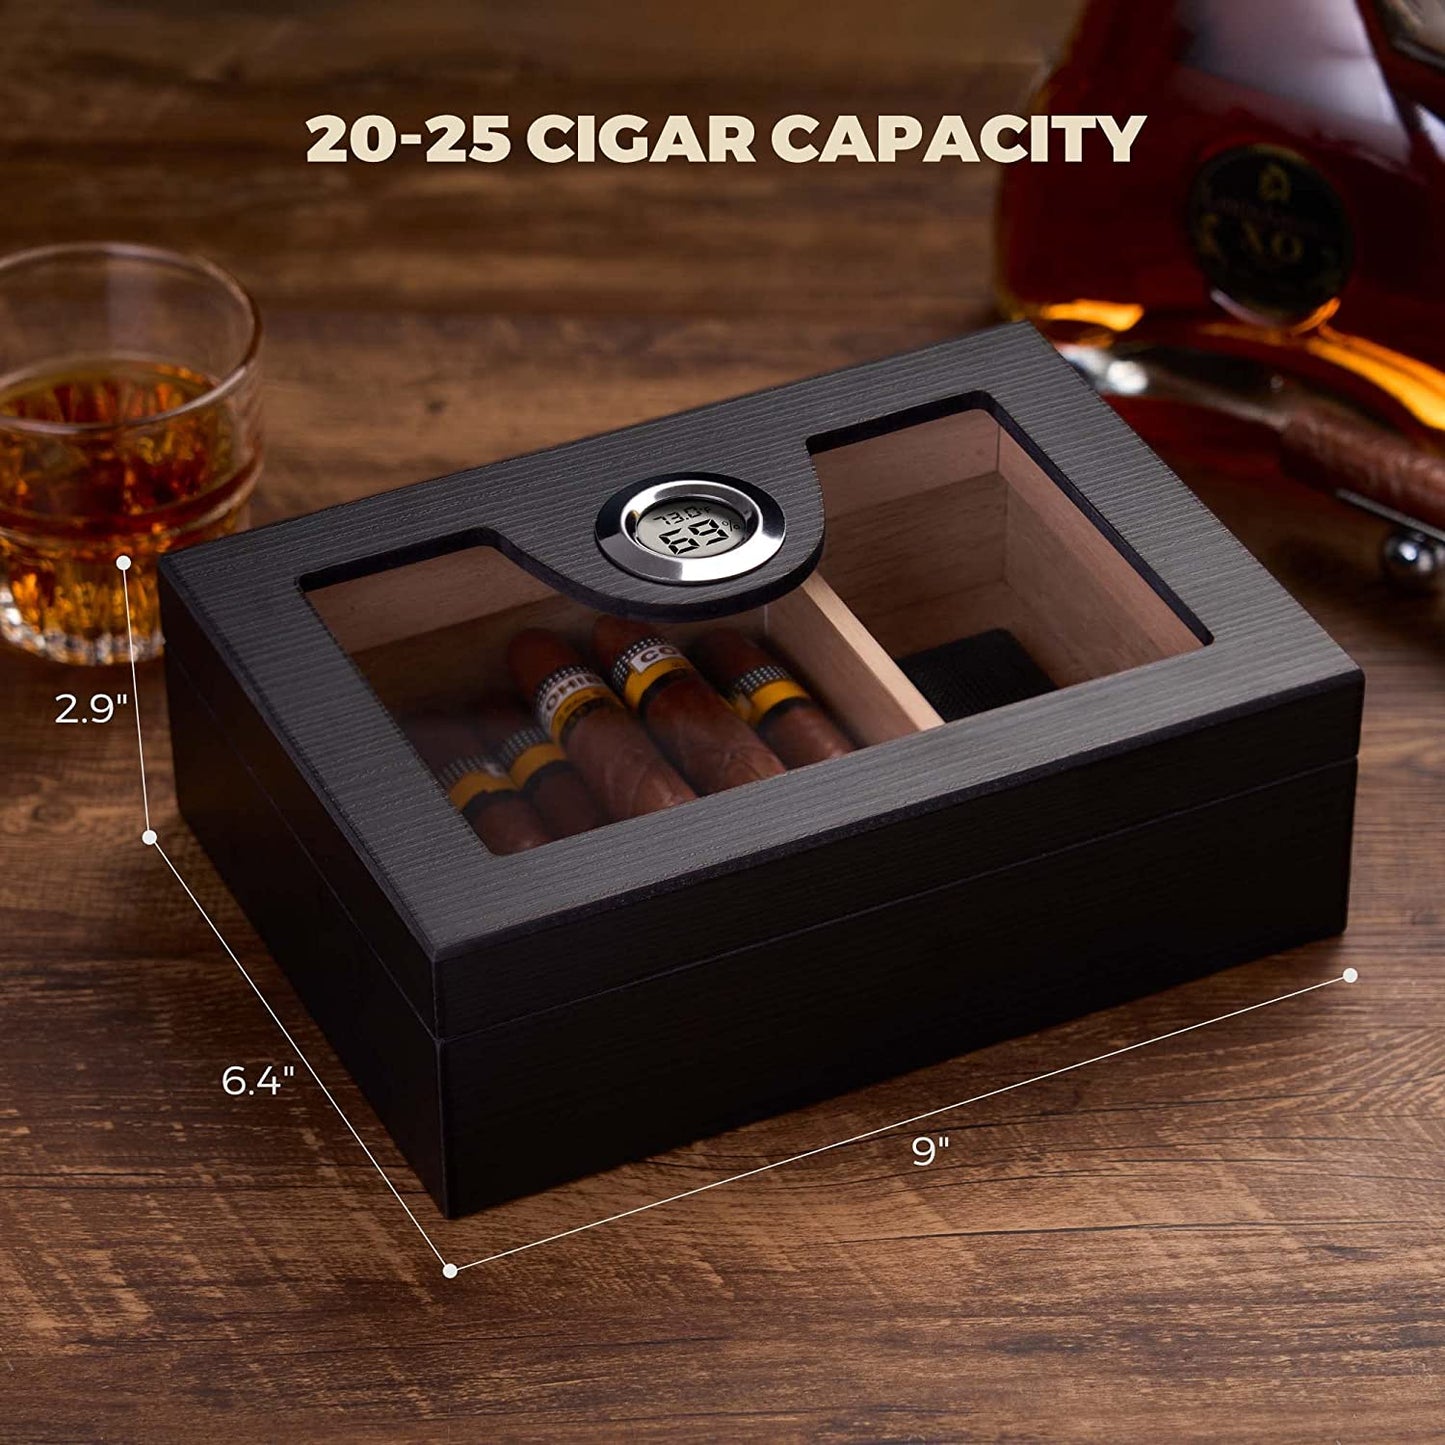 Cigar Humidor Box with Lighter and Cutter, Digital Hygrometer, Crystal Beads Humidifier, Ashtray, Spanish Cedar Lining and Divider for 25 Cigars, Cigar Accessories Gifts for Men